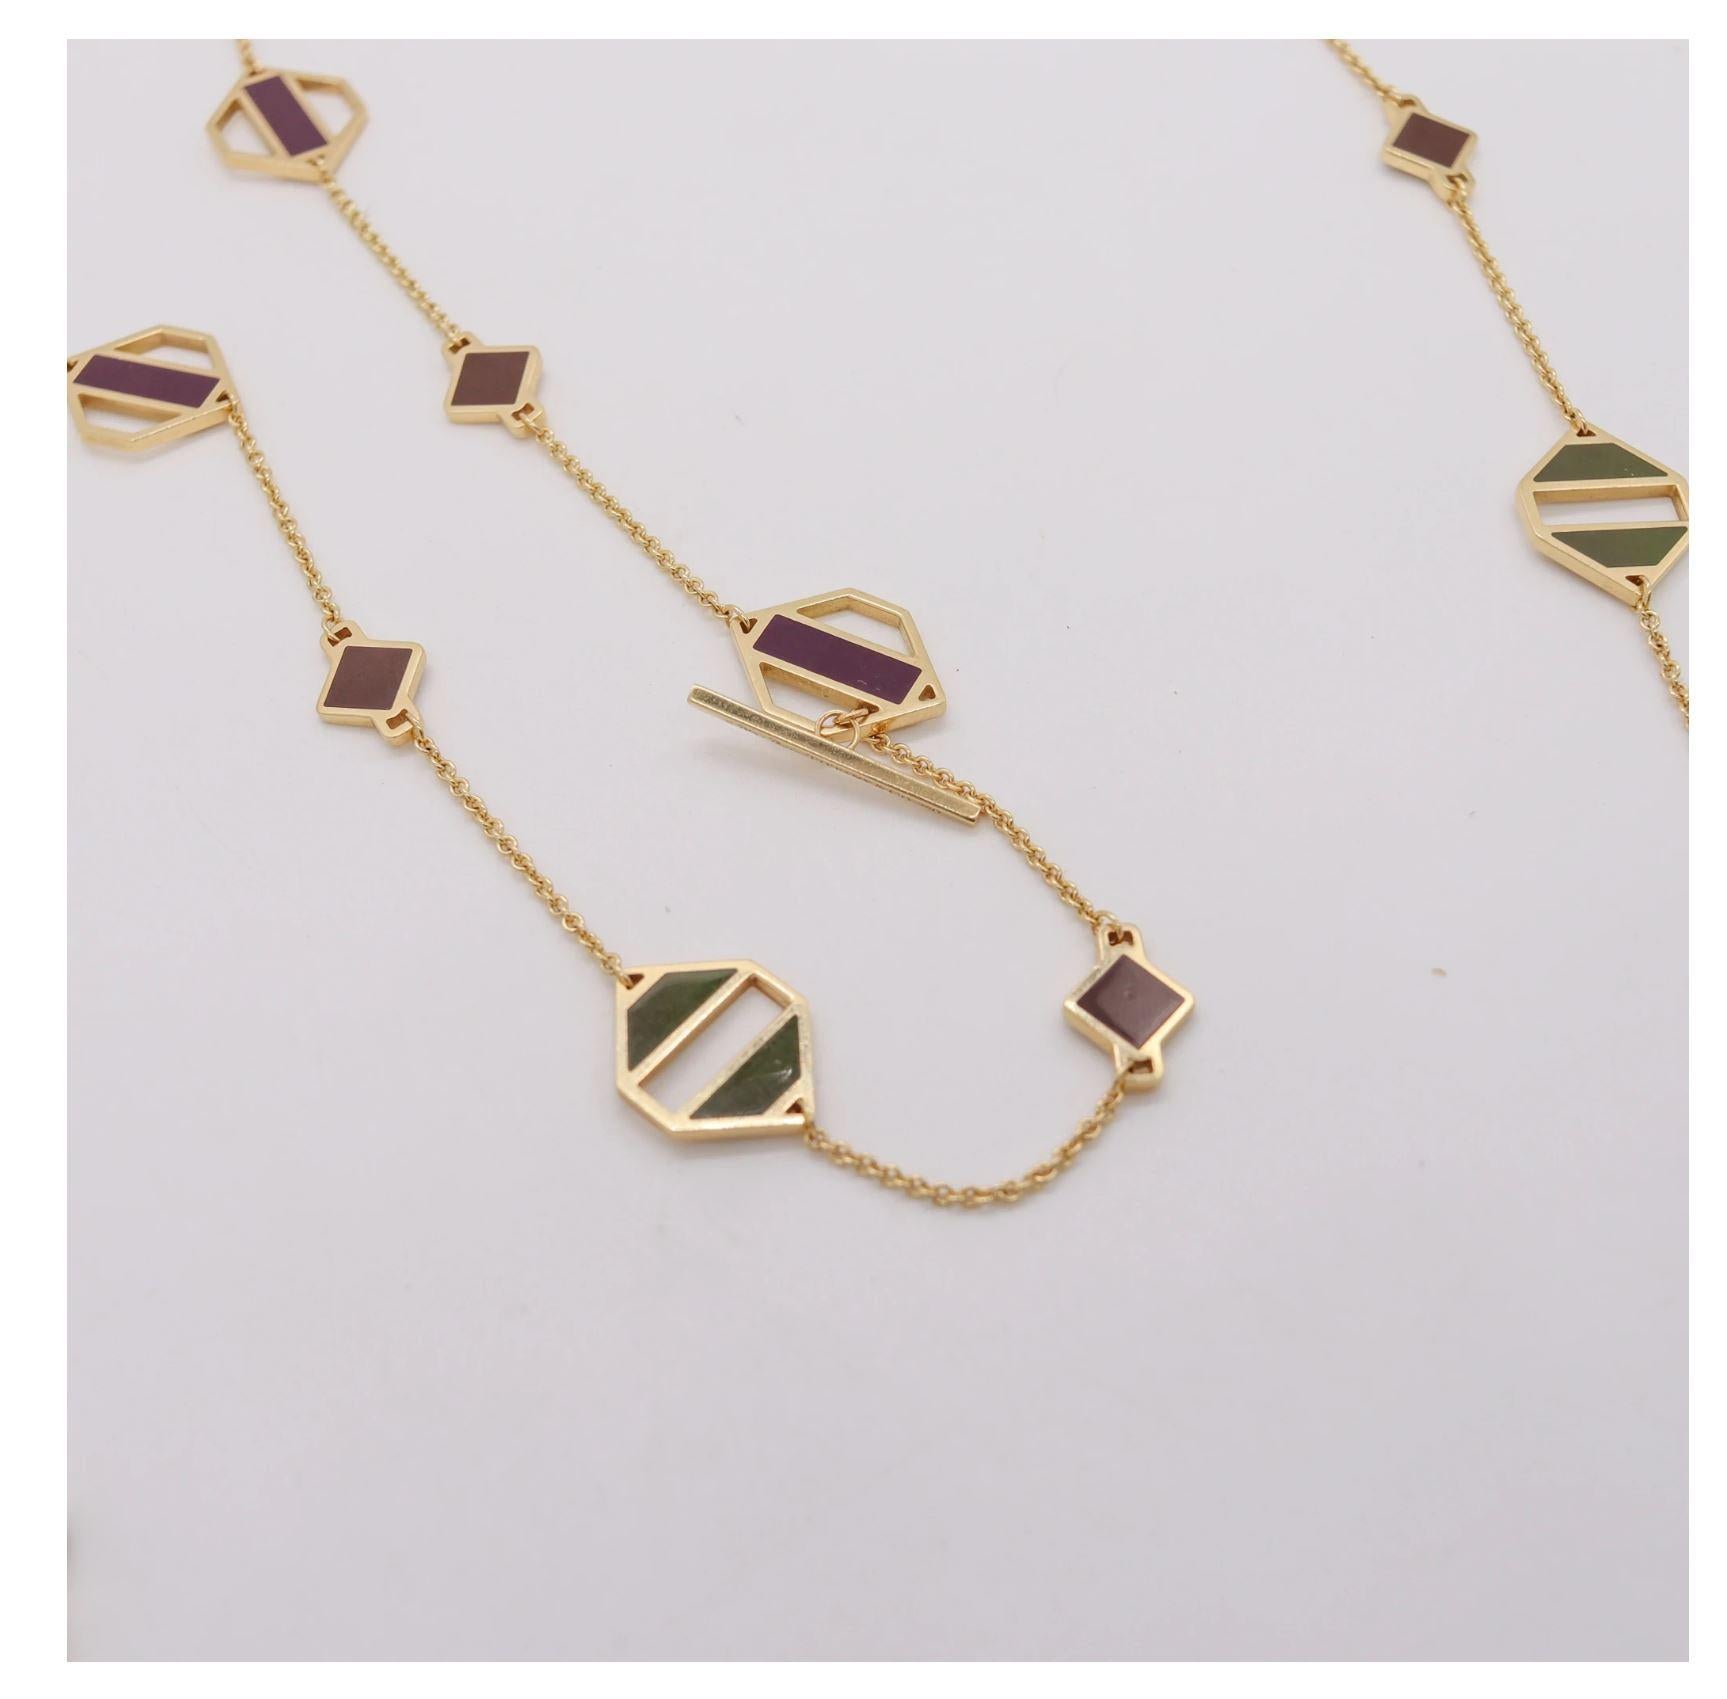 A Sautoir designed by Paloma Picasso For Tiffany & Co.

Very rare colorful piece, created in New York city by Picasso at the Tiffany studios, back in the 1980's. This long geometric sautoir necklace has been crafted in solid yellow gold of 18 karats